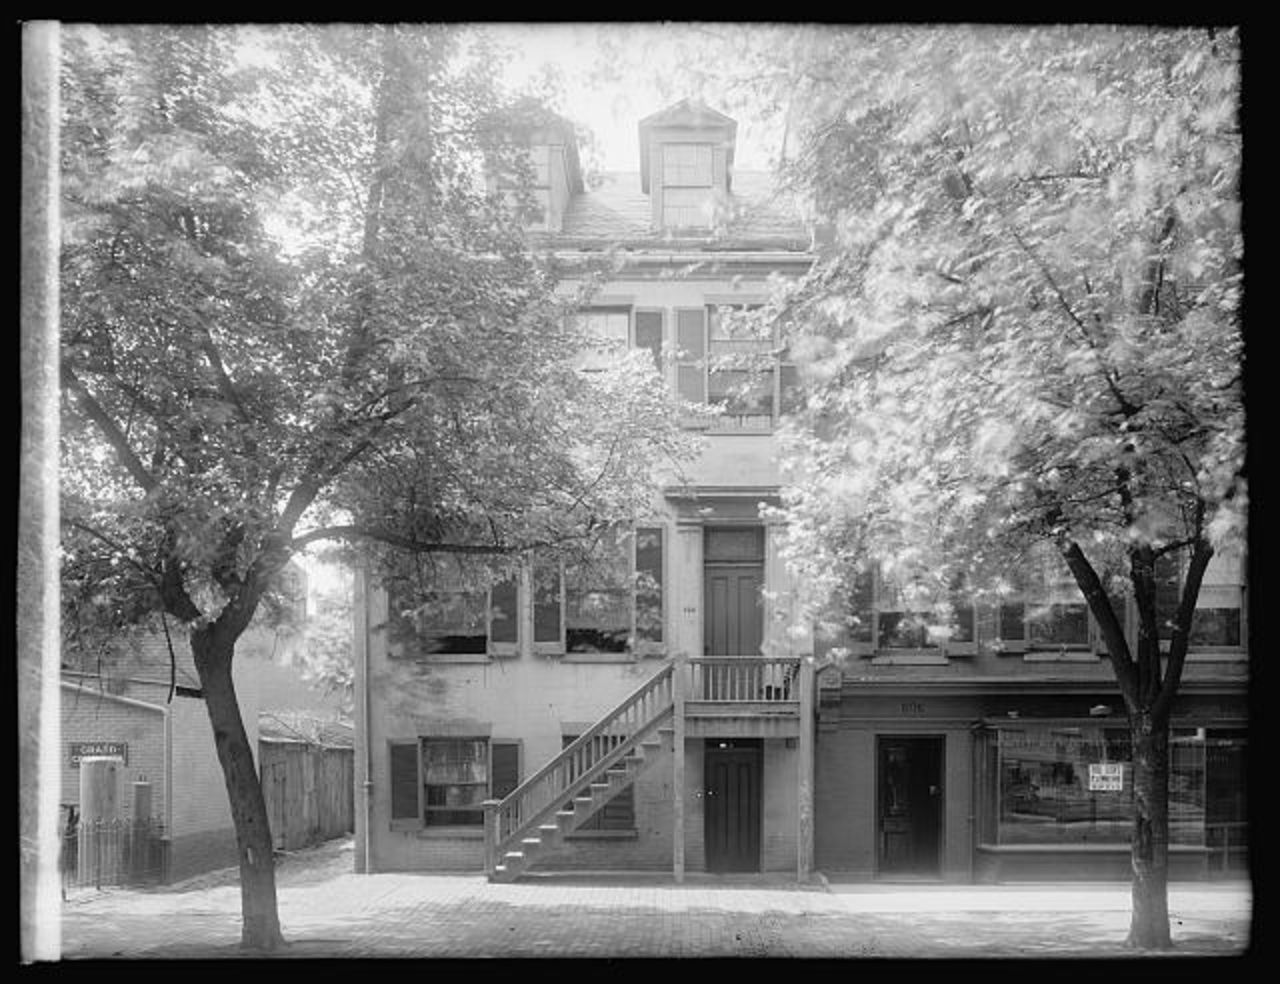 An early 20th century photo shows the building that housed Mary Surratt's Washington, D.C., boarding house — the site where conspirators plotted against President Abraham Lincoln.